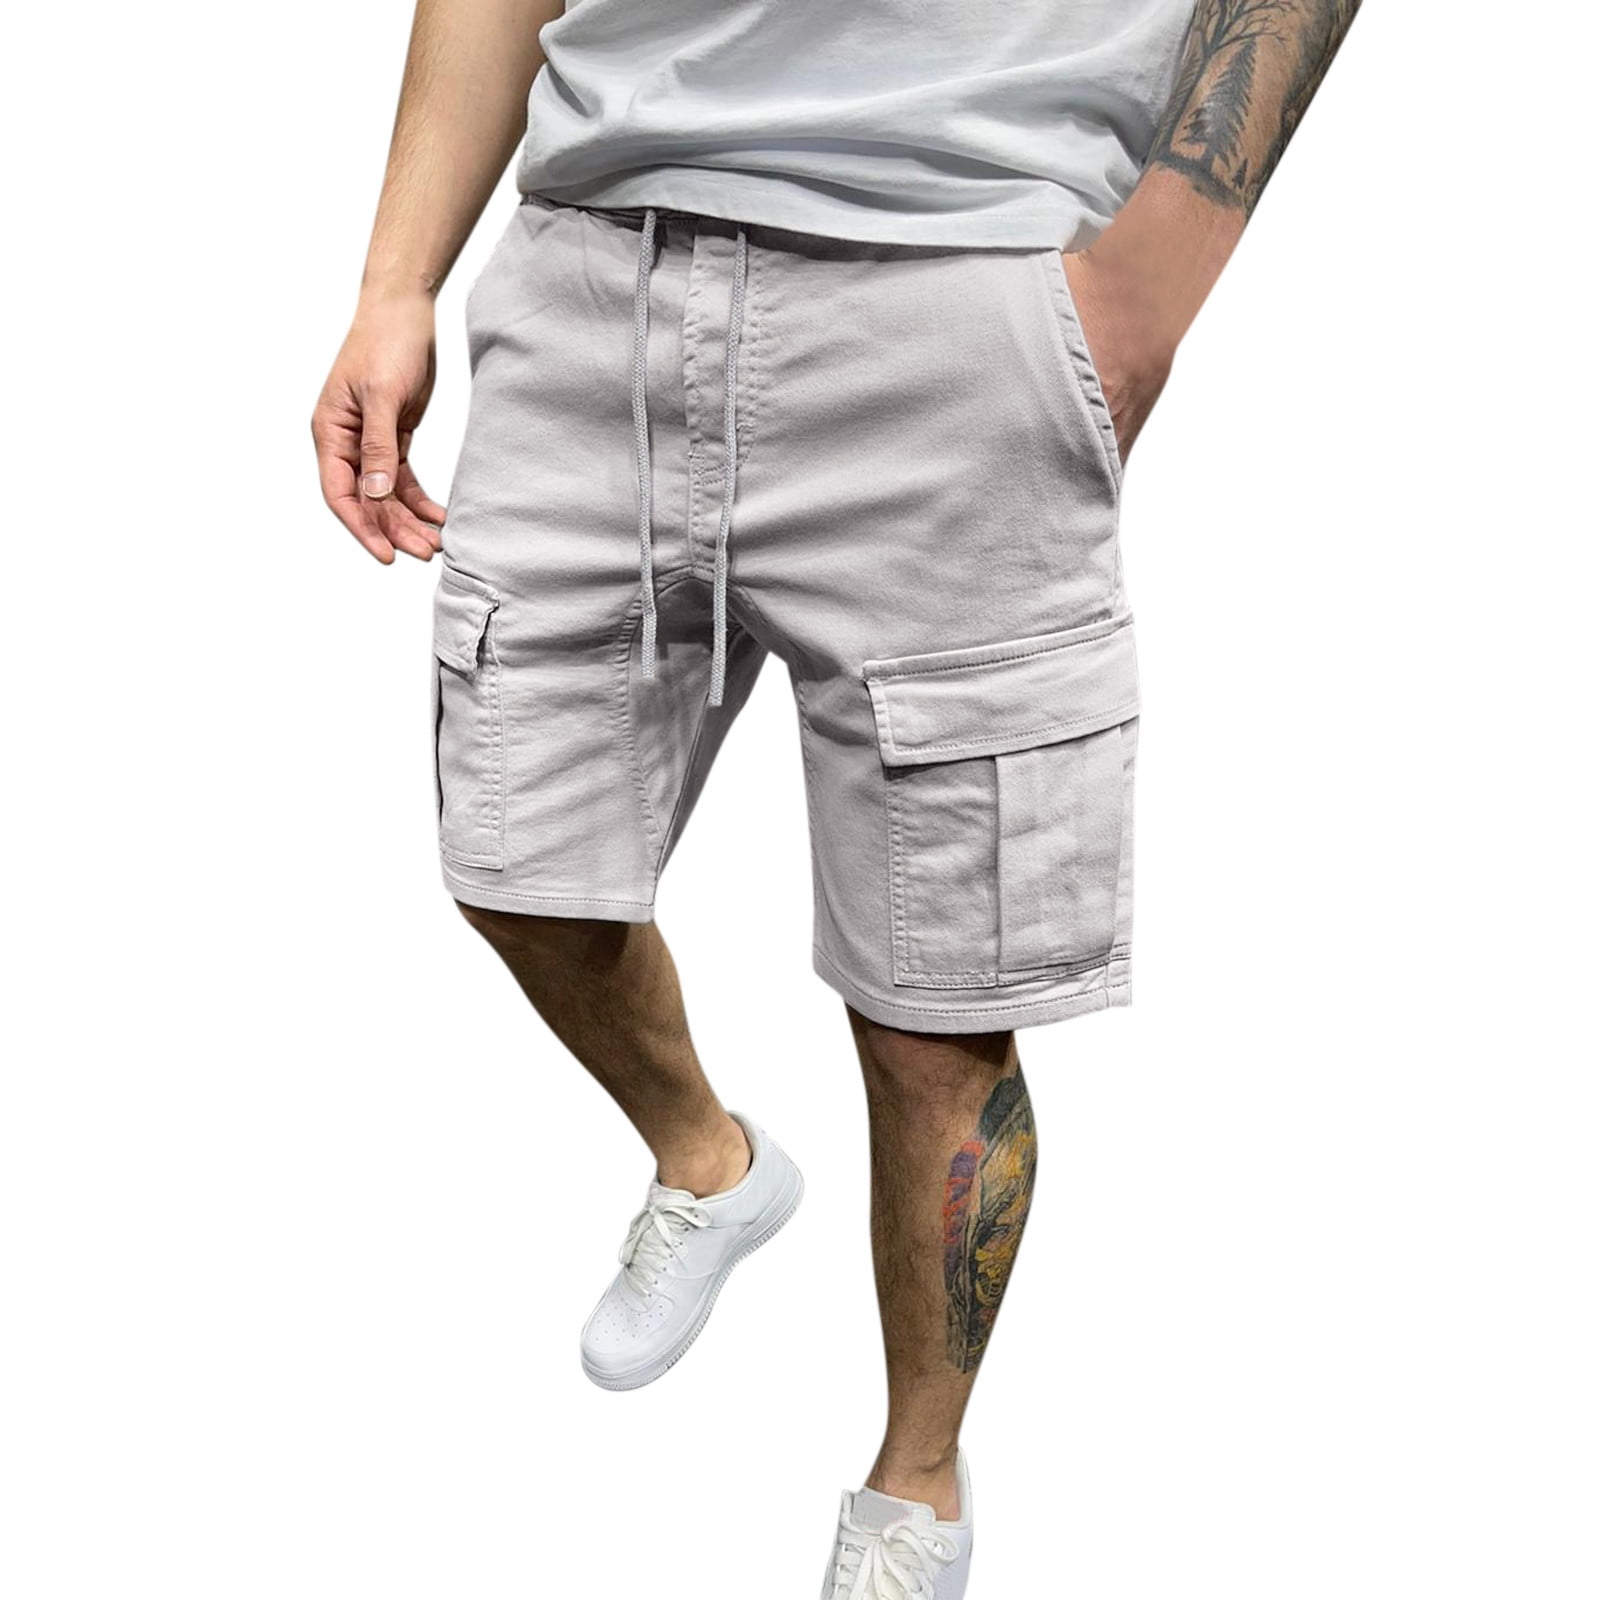 adviicd Shorts Men's Belted Tactical Cargo Long Shorts Inseam Below ...